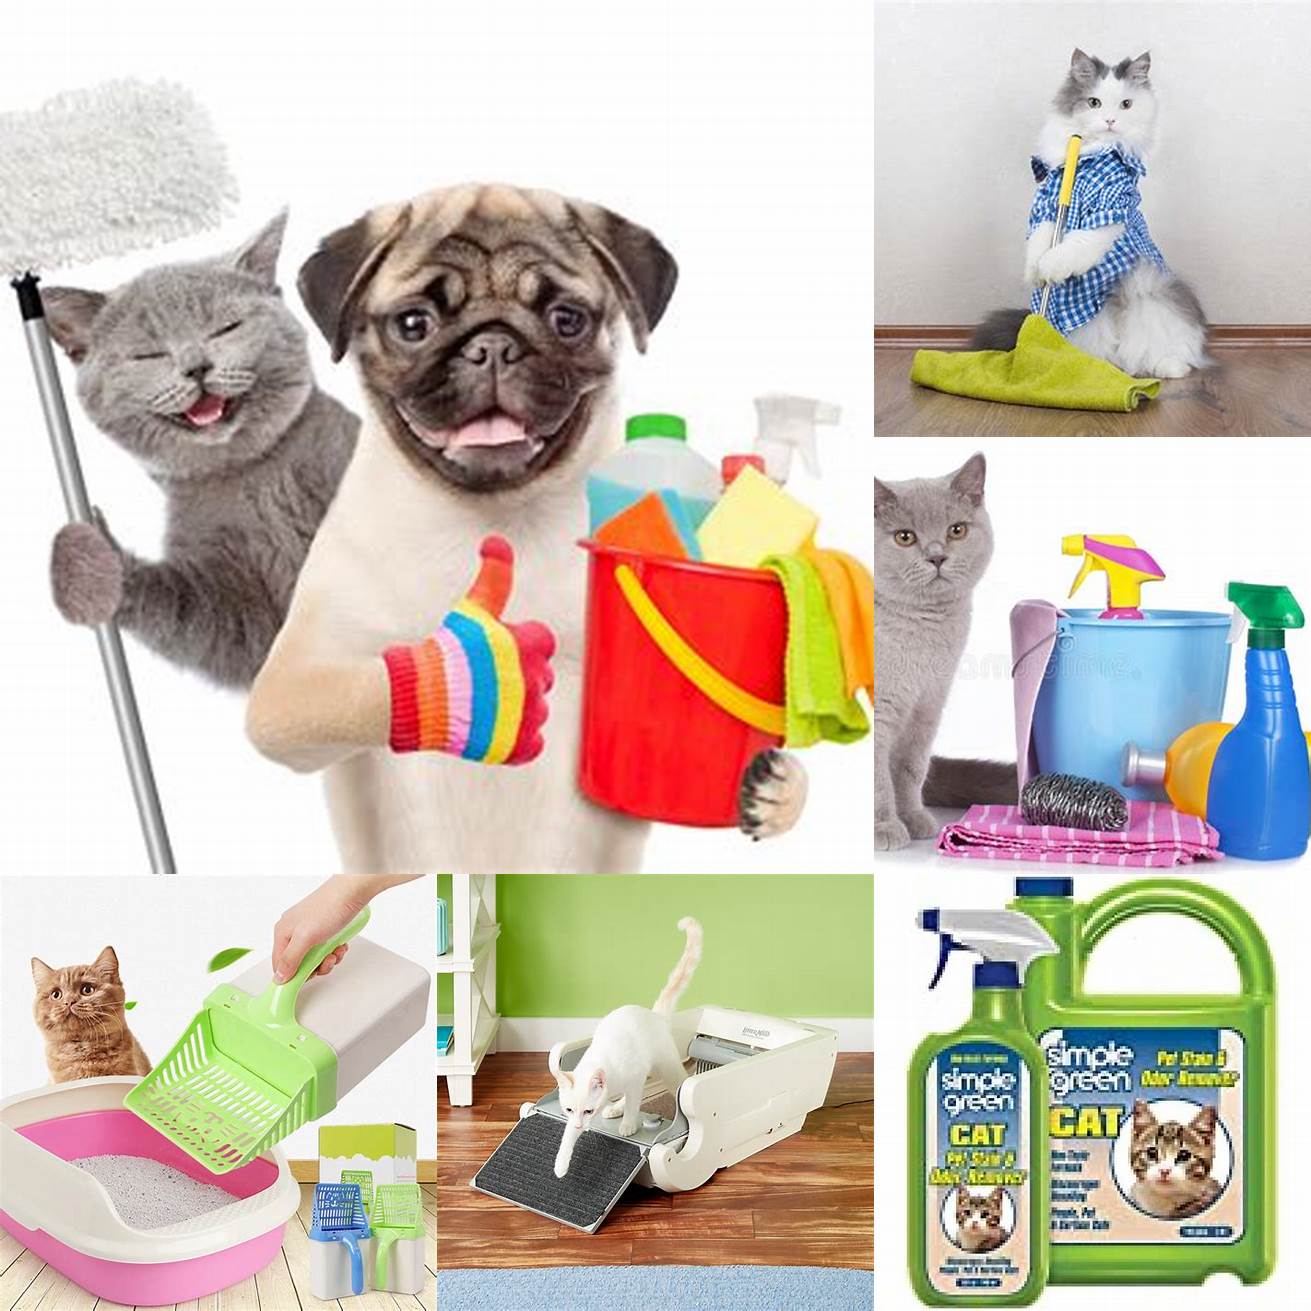 Image Idea 6 Cleaning Supplies